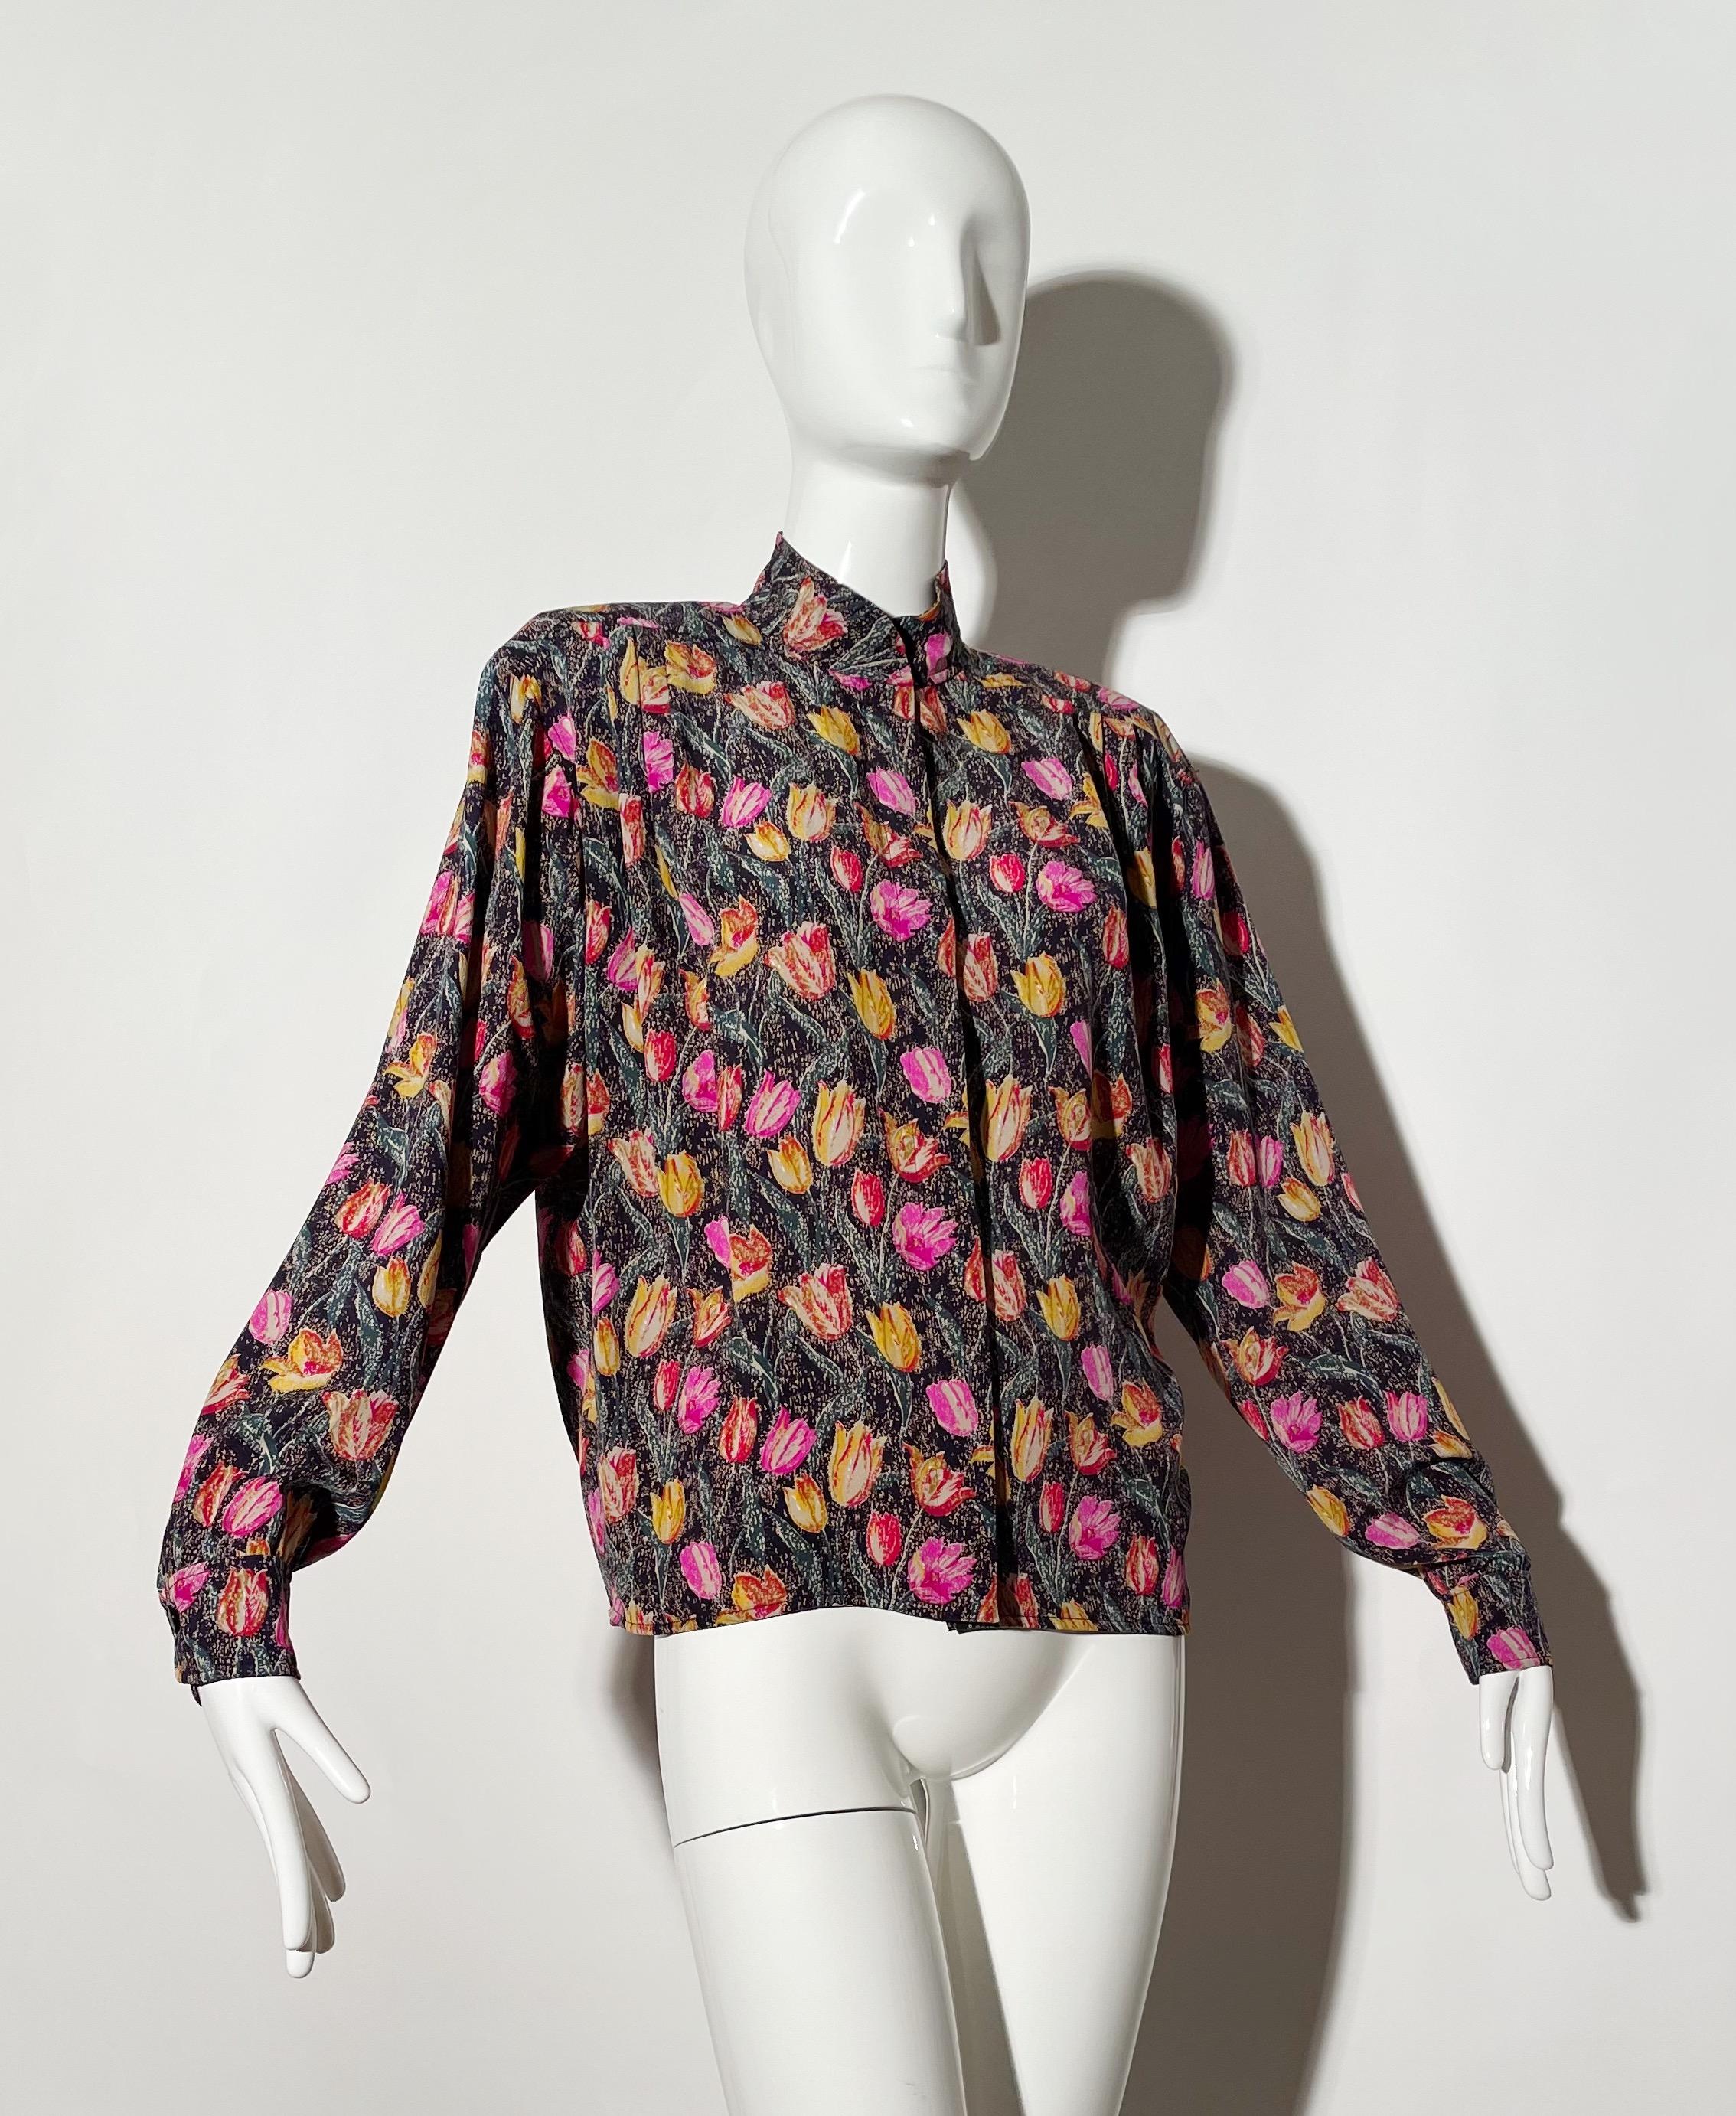 Emanuel Ungaro Floral Silk Blouse In Excellent Condition For Sale In Los Angeles, CA